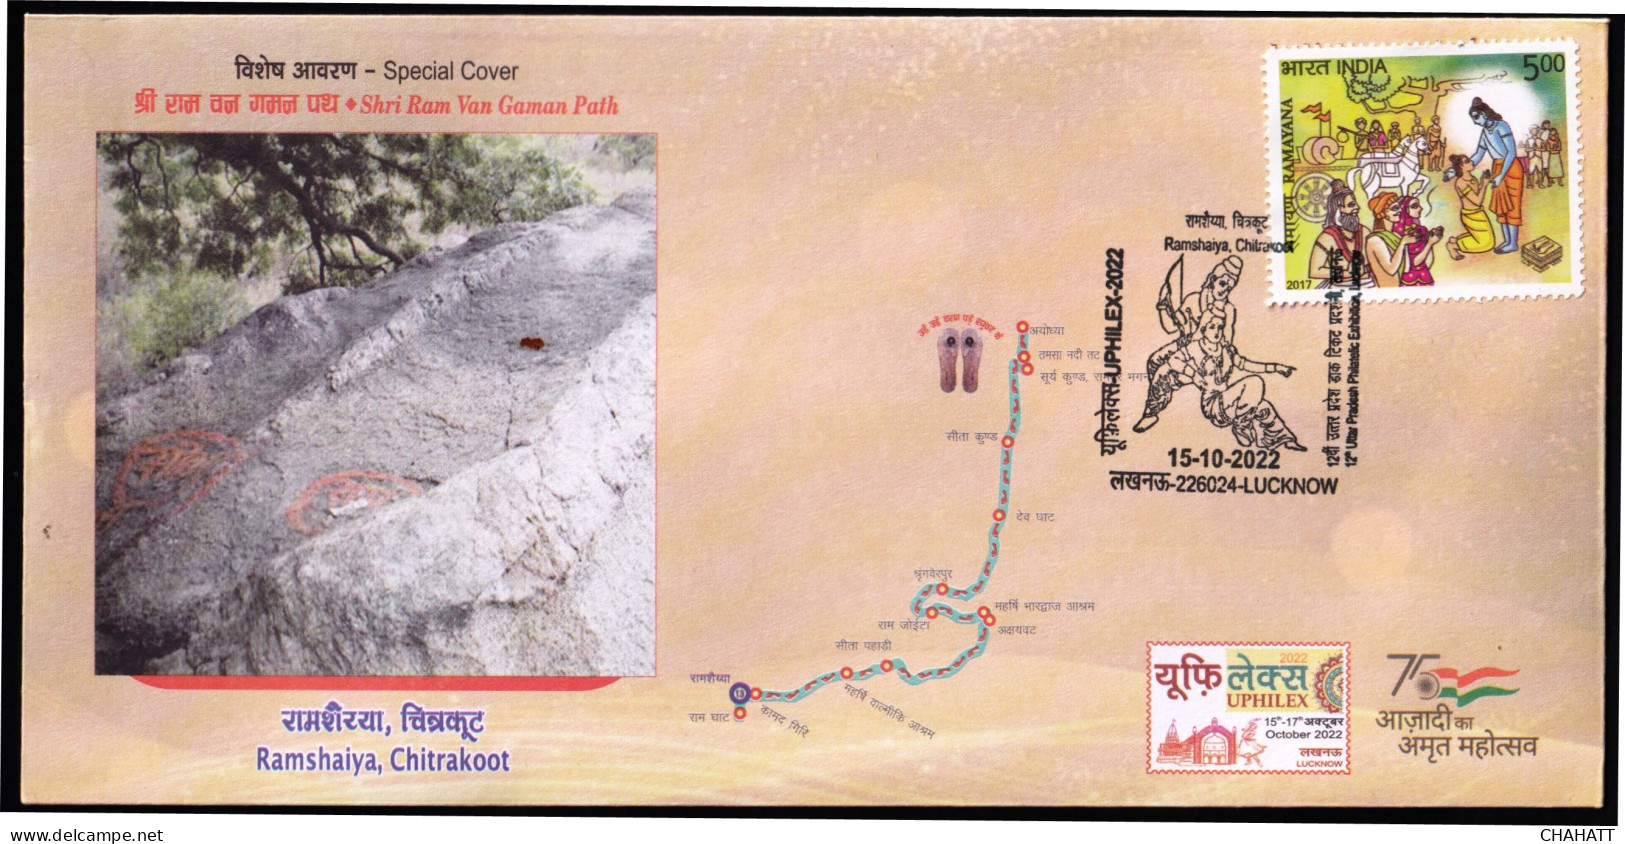 HINDUISM - RAMAYAN -CHITRAKOOT - ARCHERY - PICTORIAL CANCELLATION - SPECIAL COVER - INDIA -2022- BX4-23 - Hindoeïsme